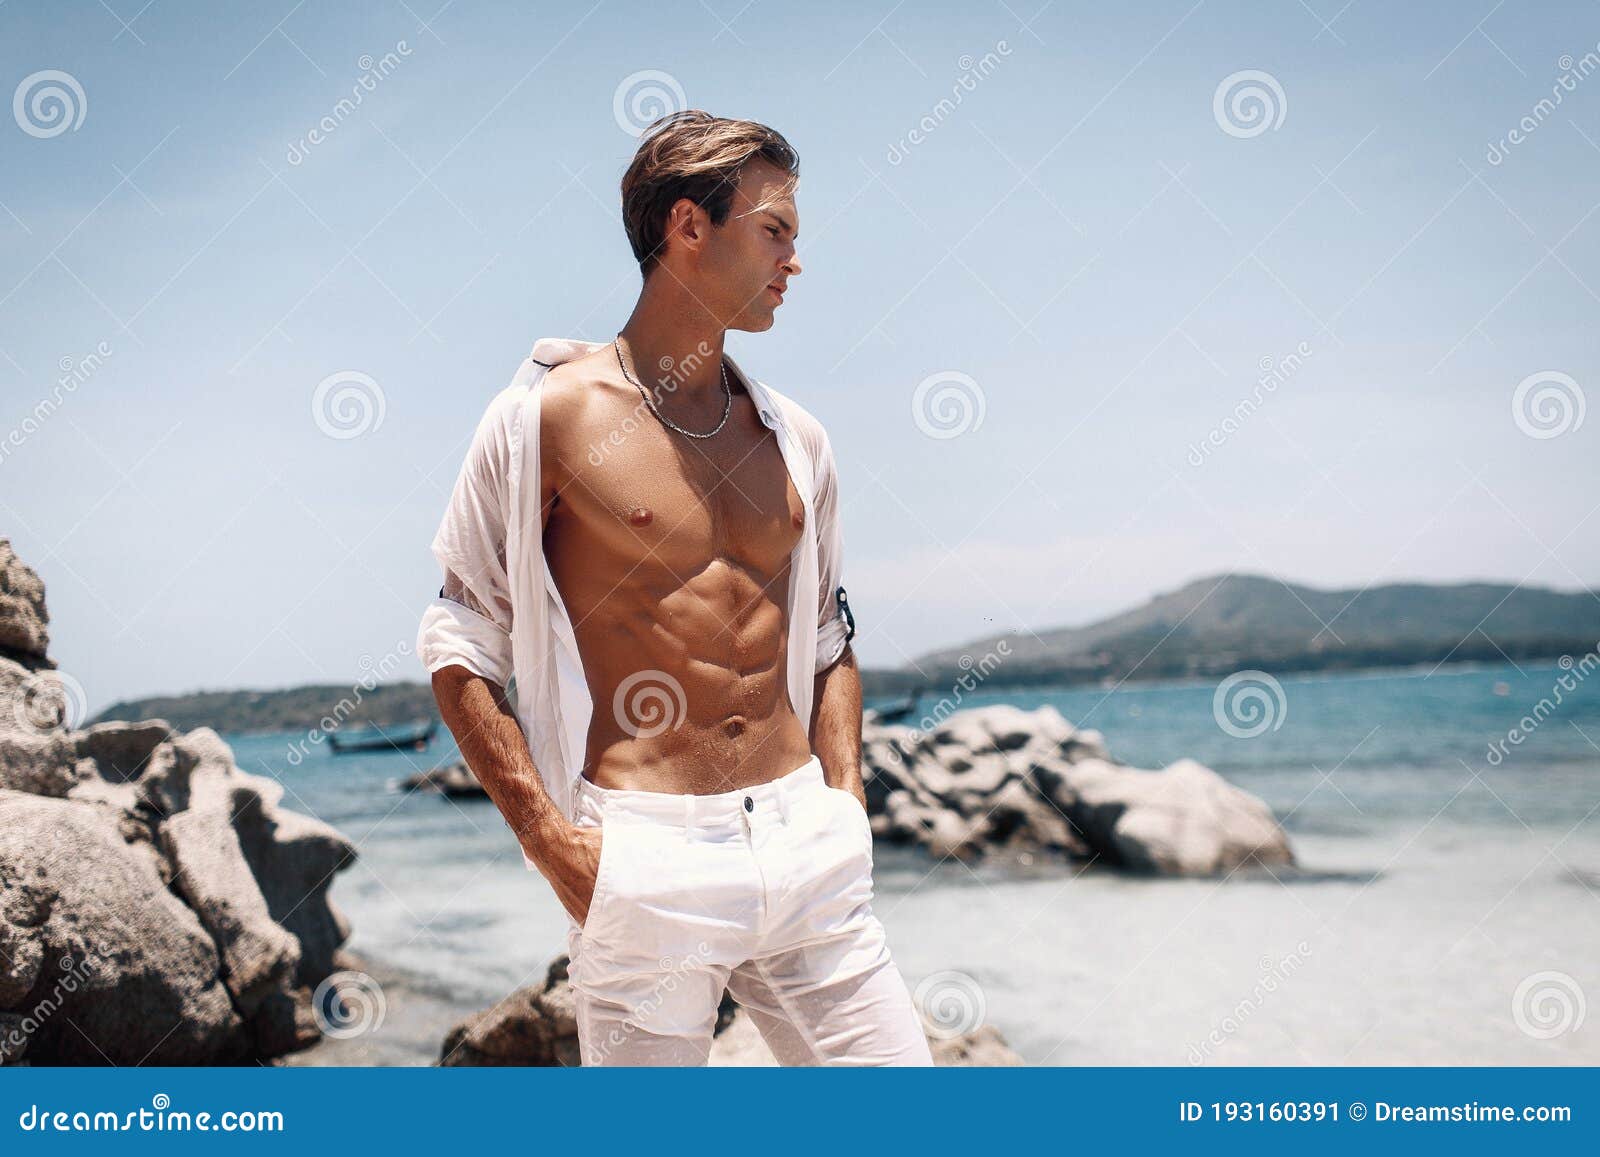 18,18 Young Male Model Posing Beach Photos   Free & Royalty Free ...